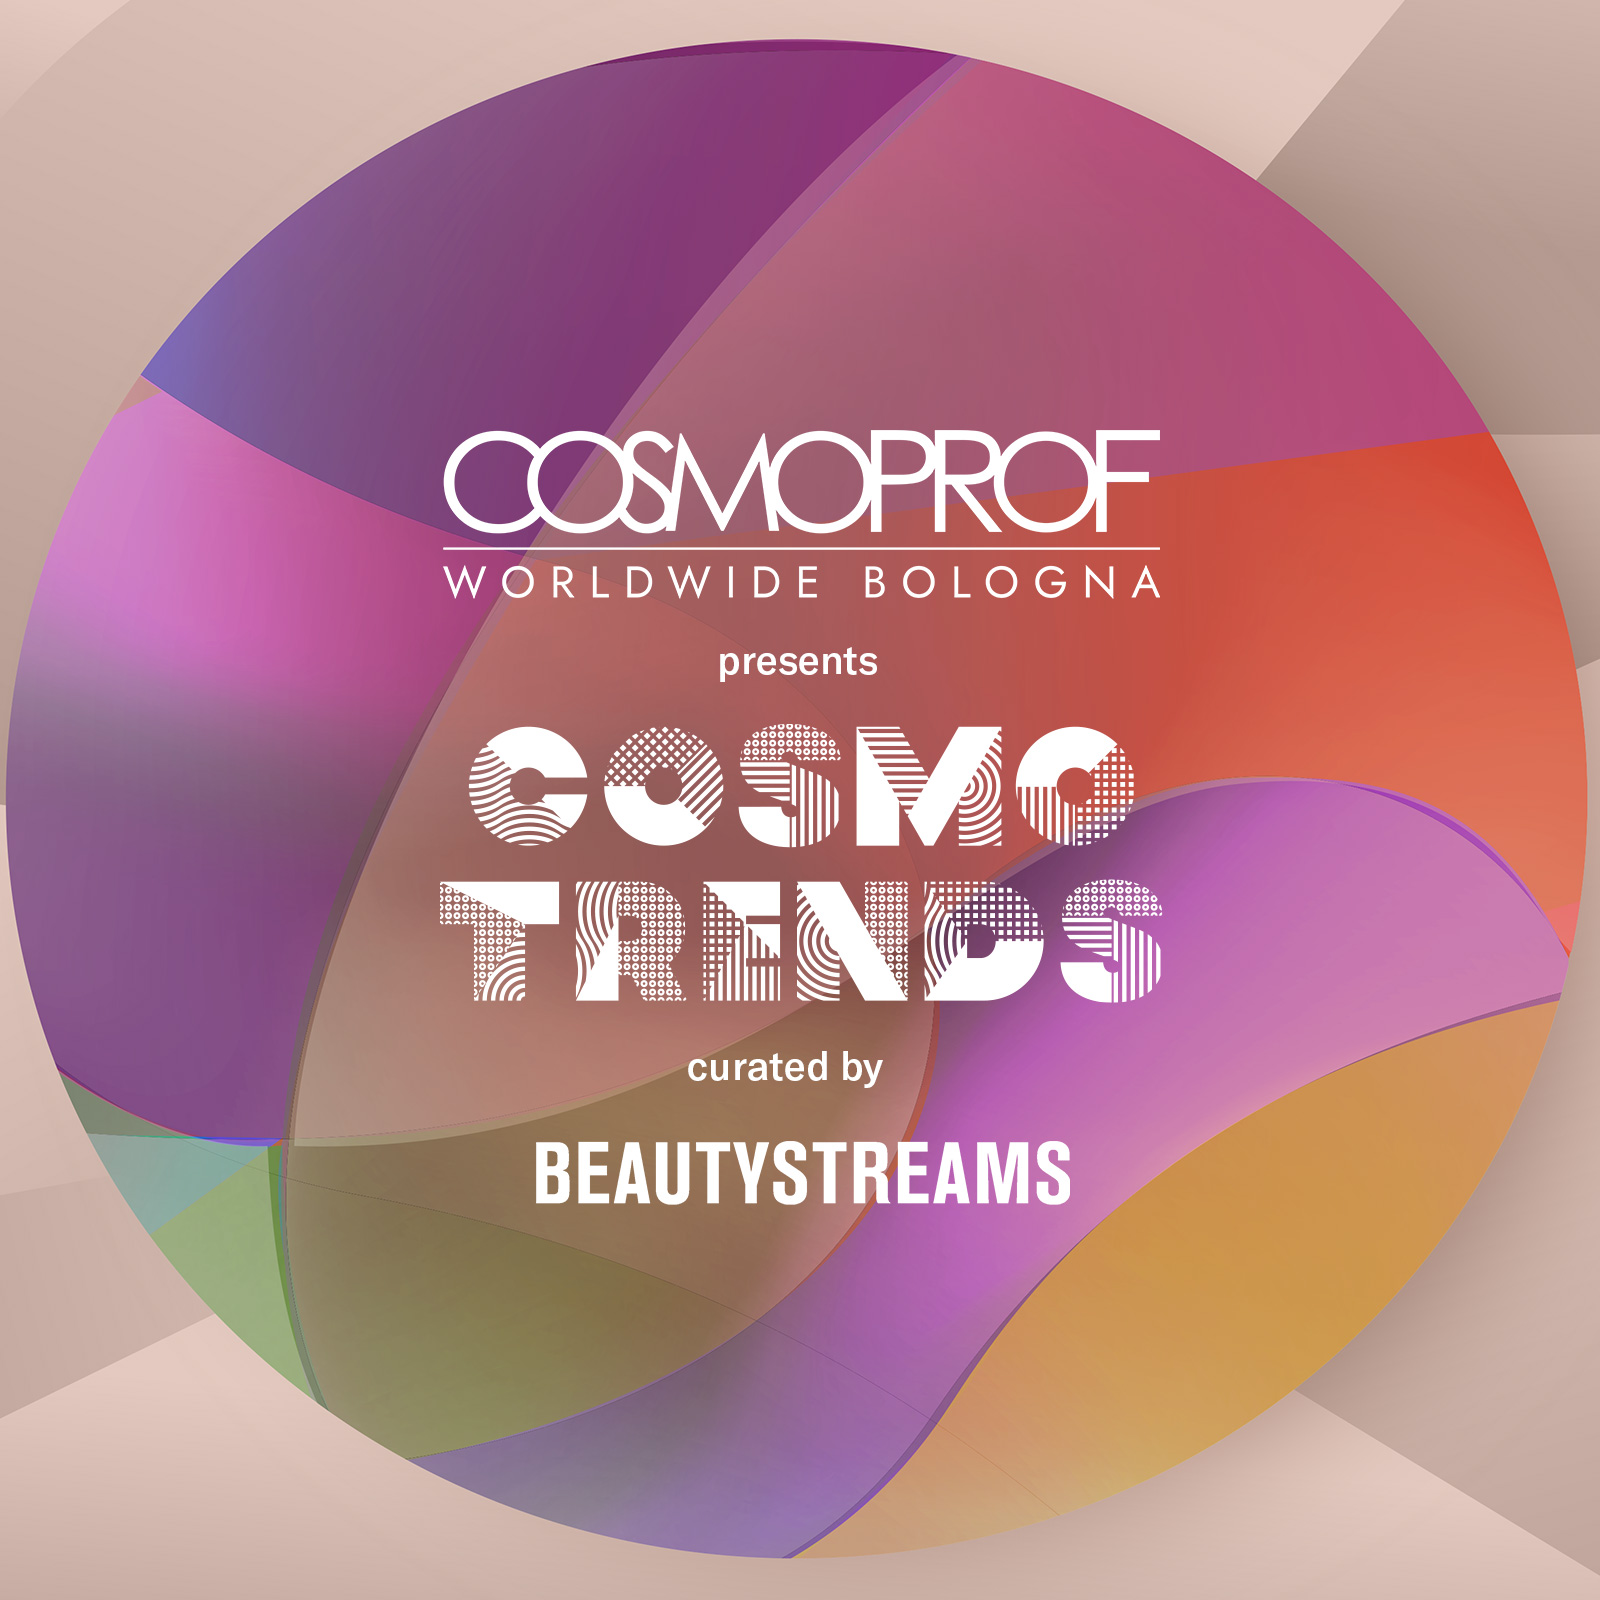 DOWNLOAD THE COSMOTRENDS REPORT 2023